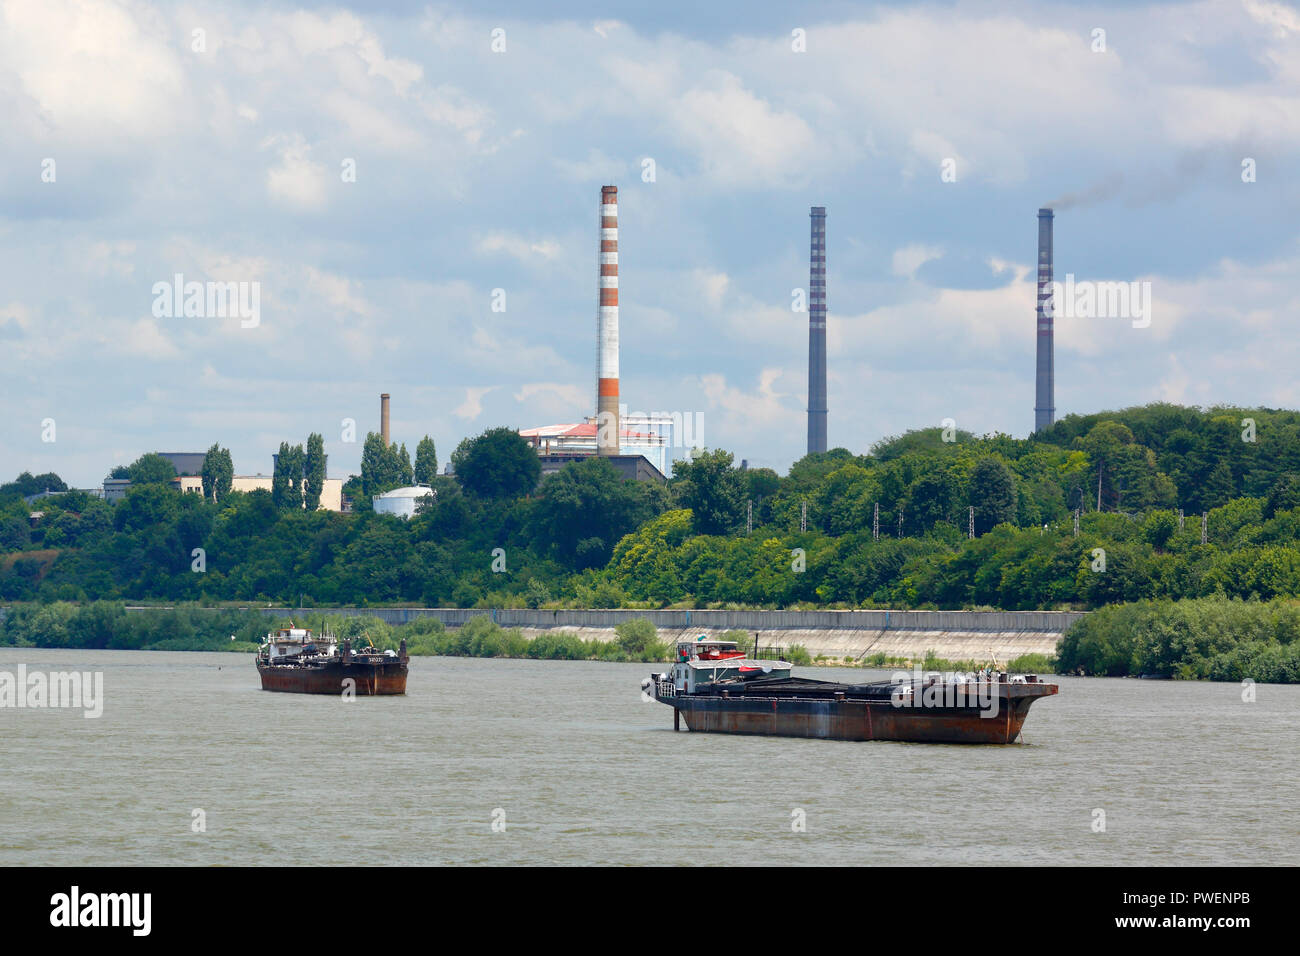 Bulgaria, Northern Bulgaria, Ruse at the Danube, Rousse, Russe, Danube lowlands, industrial landscape, chimney stacks, freighters on the Danube, Danube landscape, river landscape, Danube navigation Stock Photo